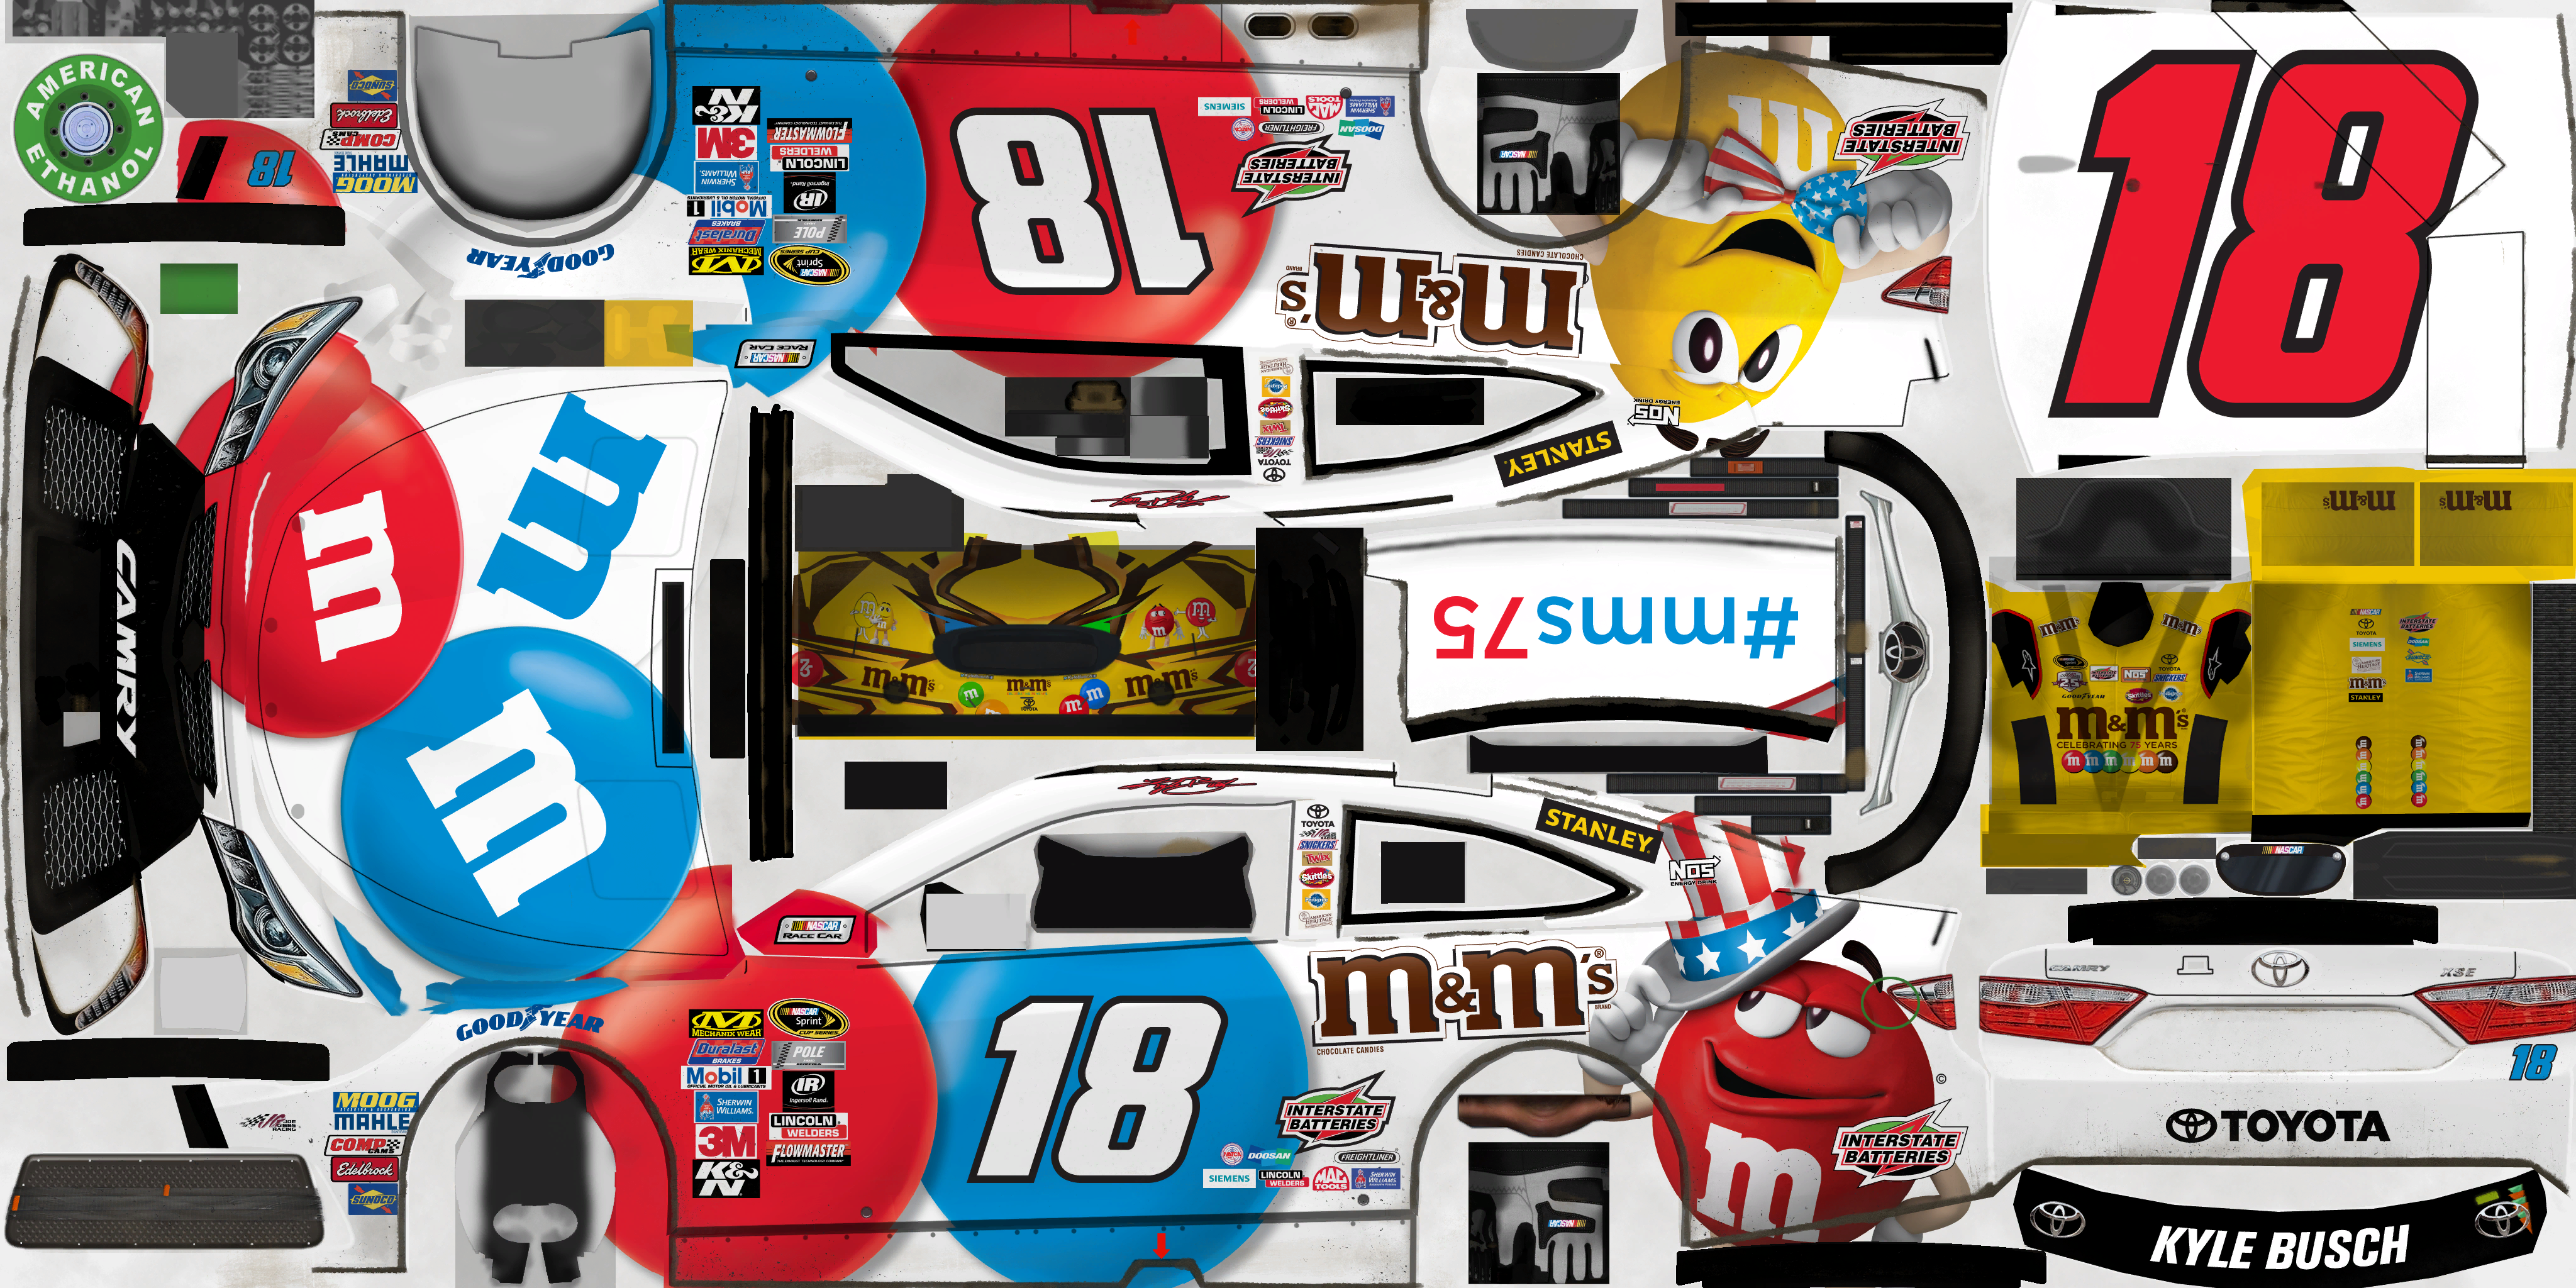 #18 Kyle Busch (M&M'S Red White and Blue)